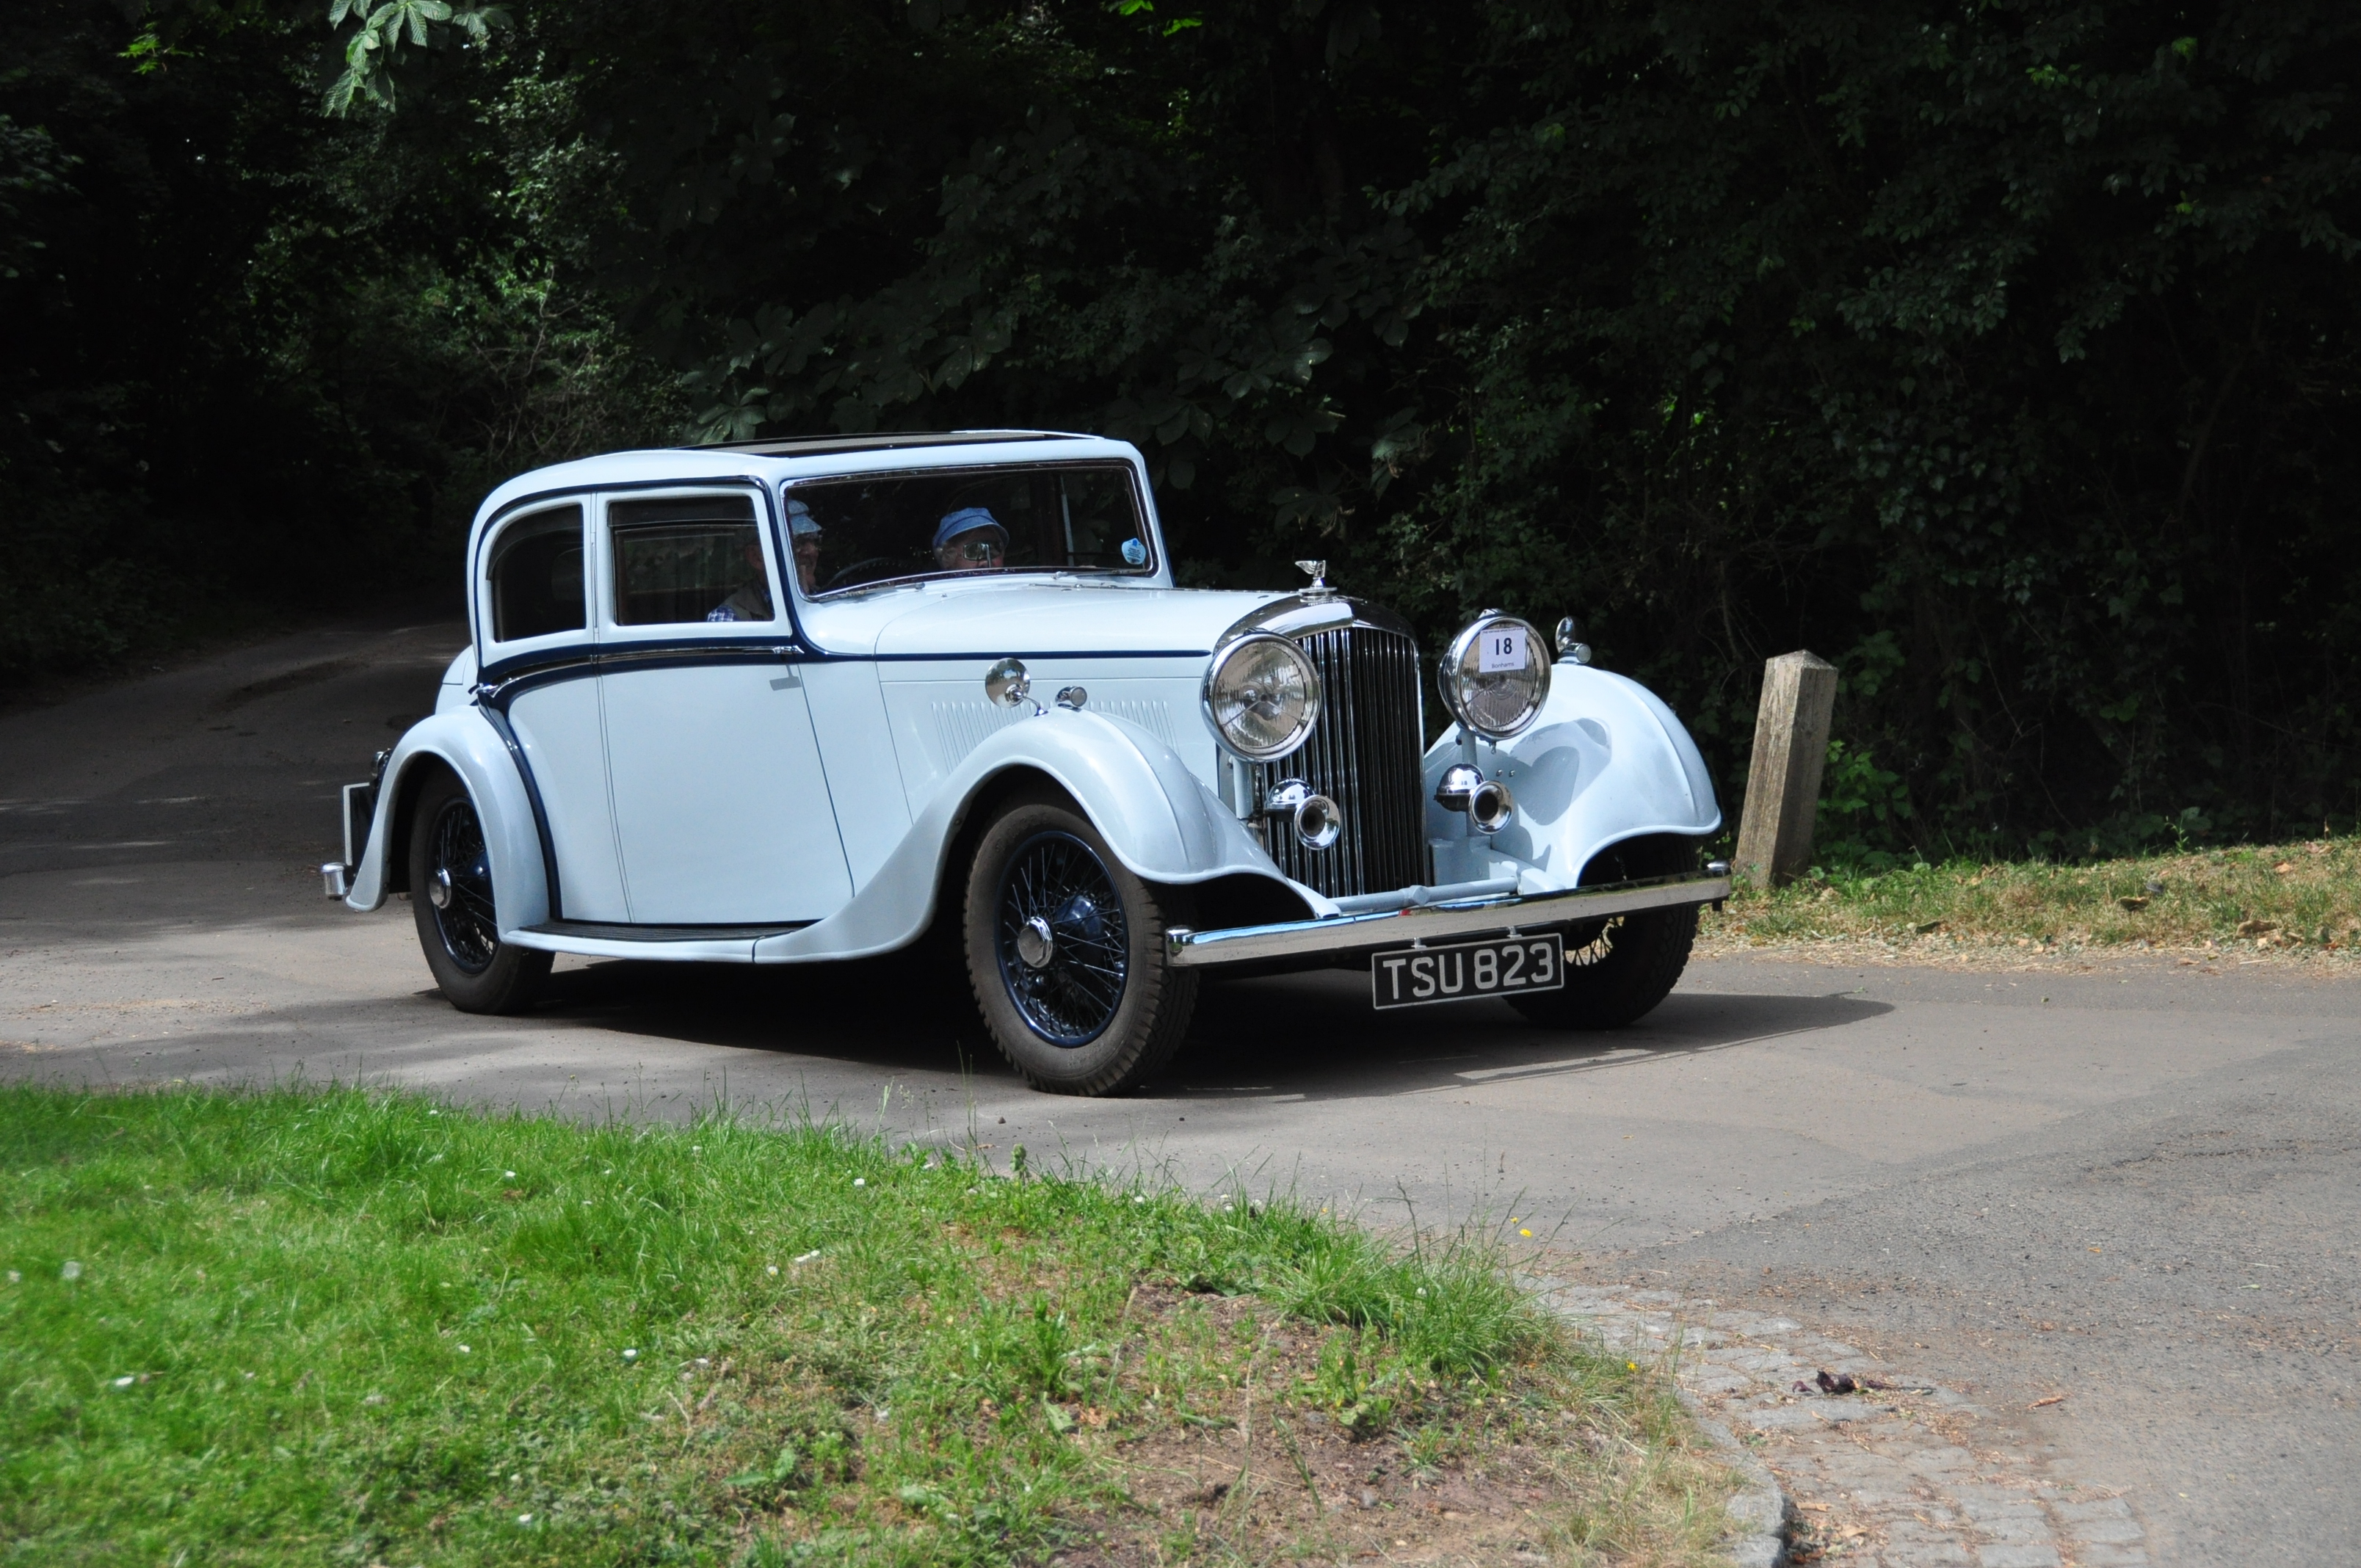 Entries are now open for the VSCC (South Downs) Summer Rally on 30th July 2022 near Liphook cover